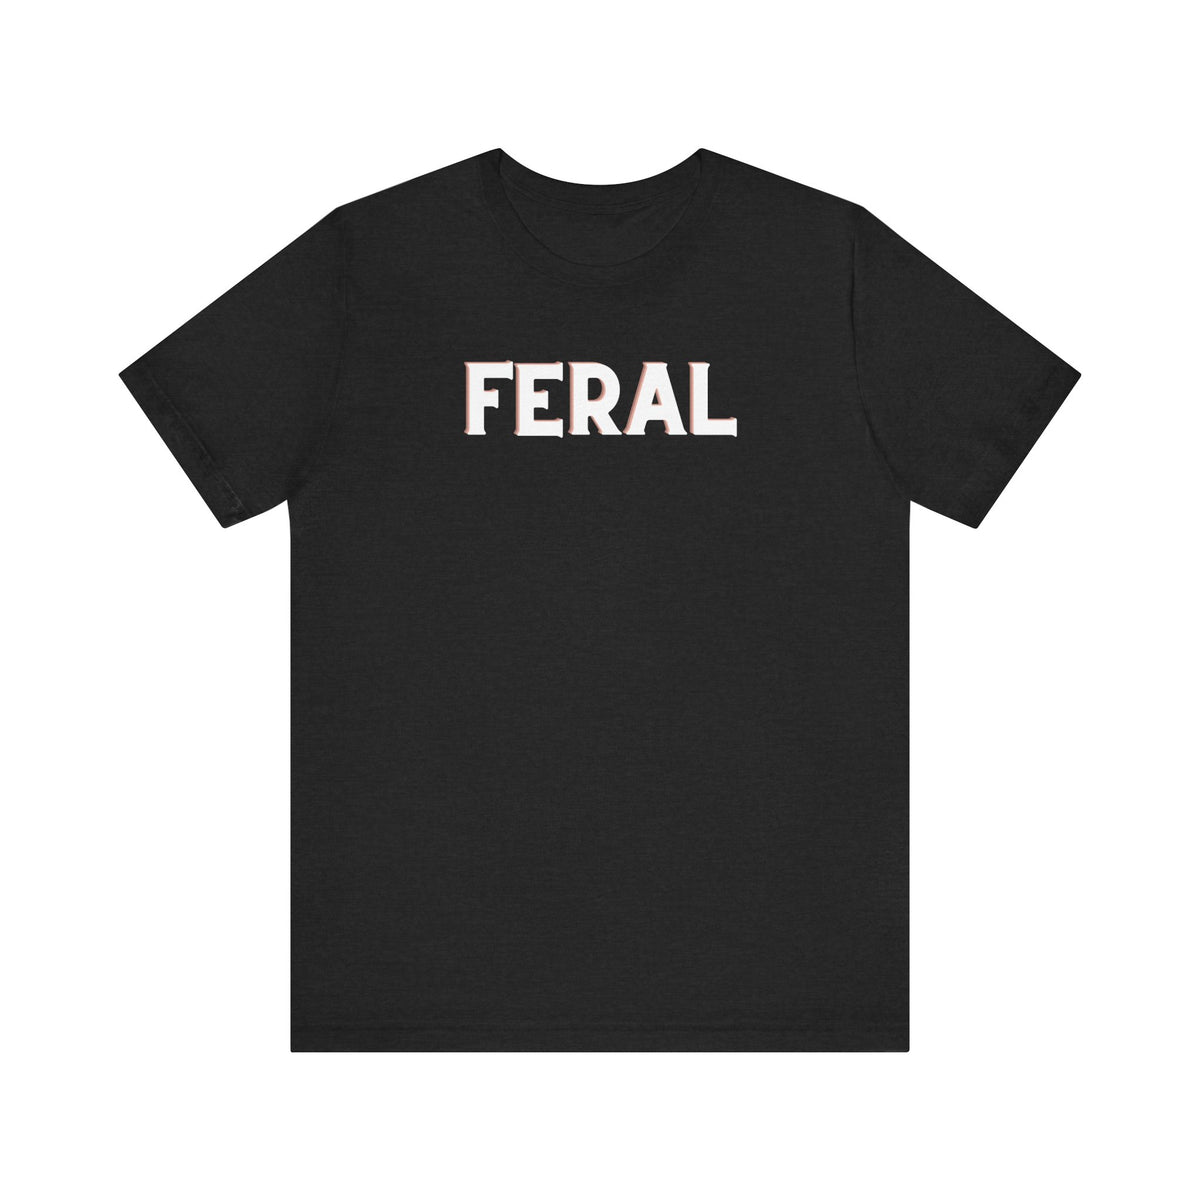 Feral T-shirt | Funny Graphic T-Shirt | Women's Black & White Graphic Tees